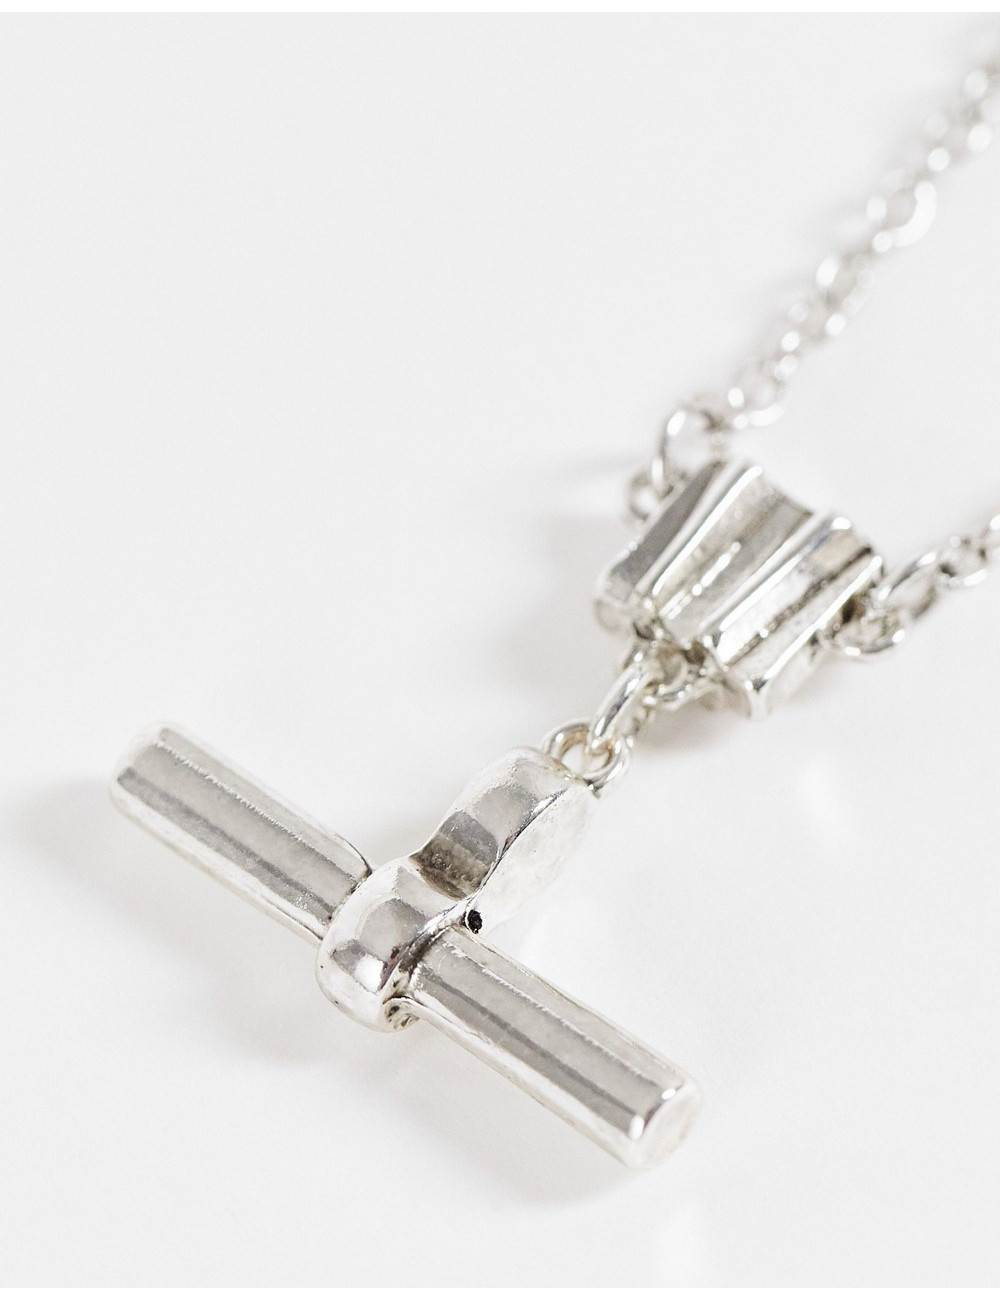 Icon Brand t-bar necklace...